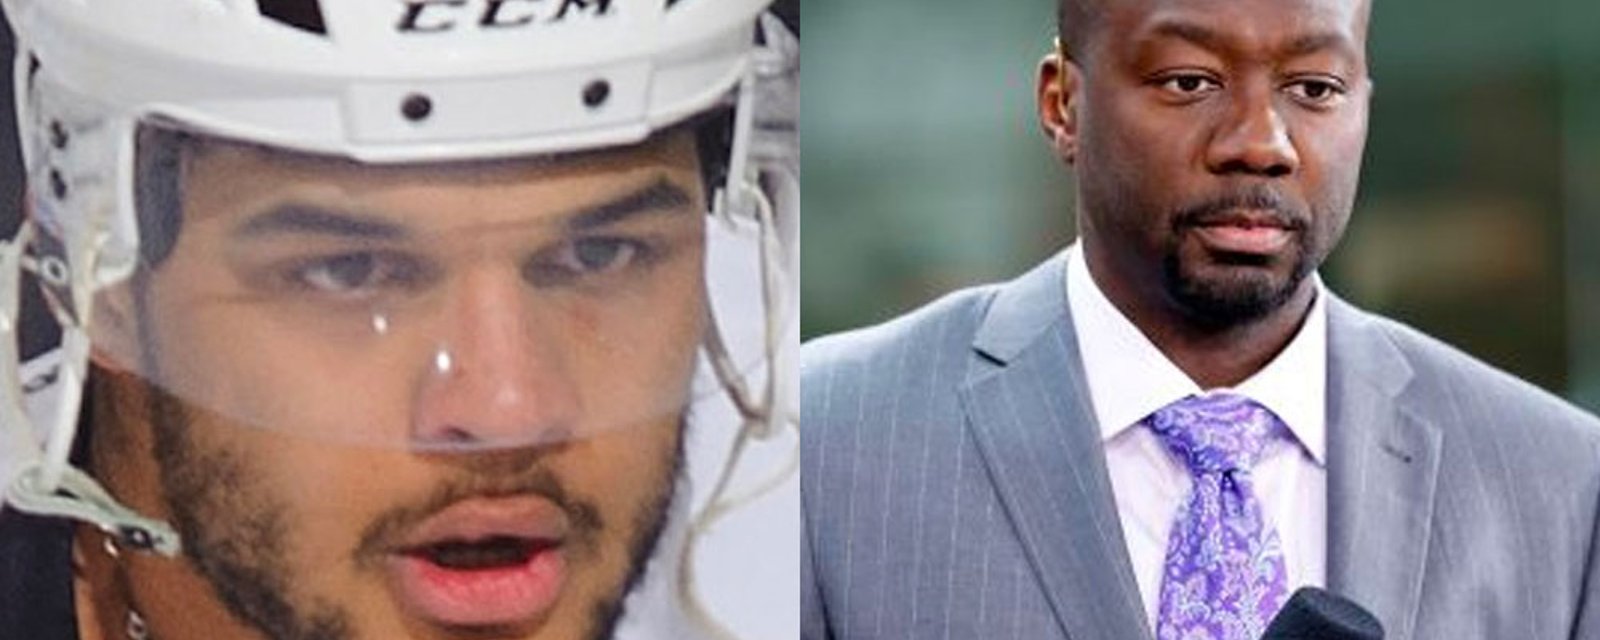 Akim Aliu attacks Anson Carter for not supporting NHL protest! 